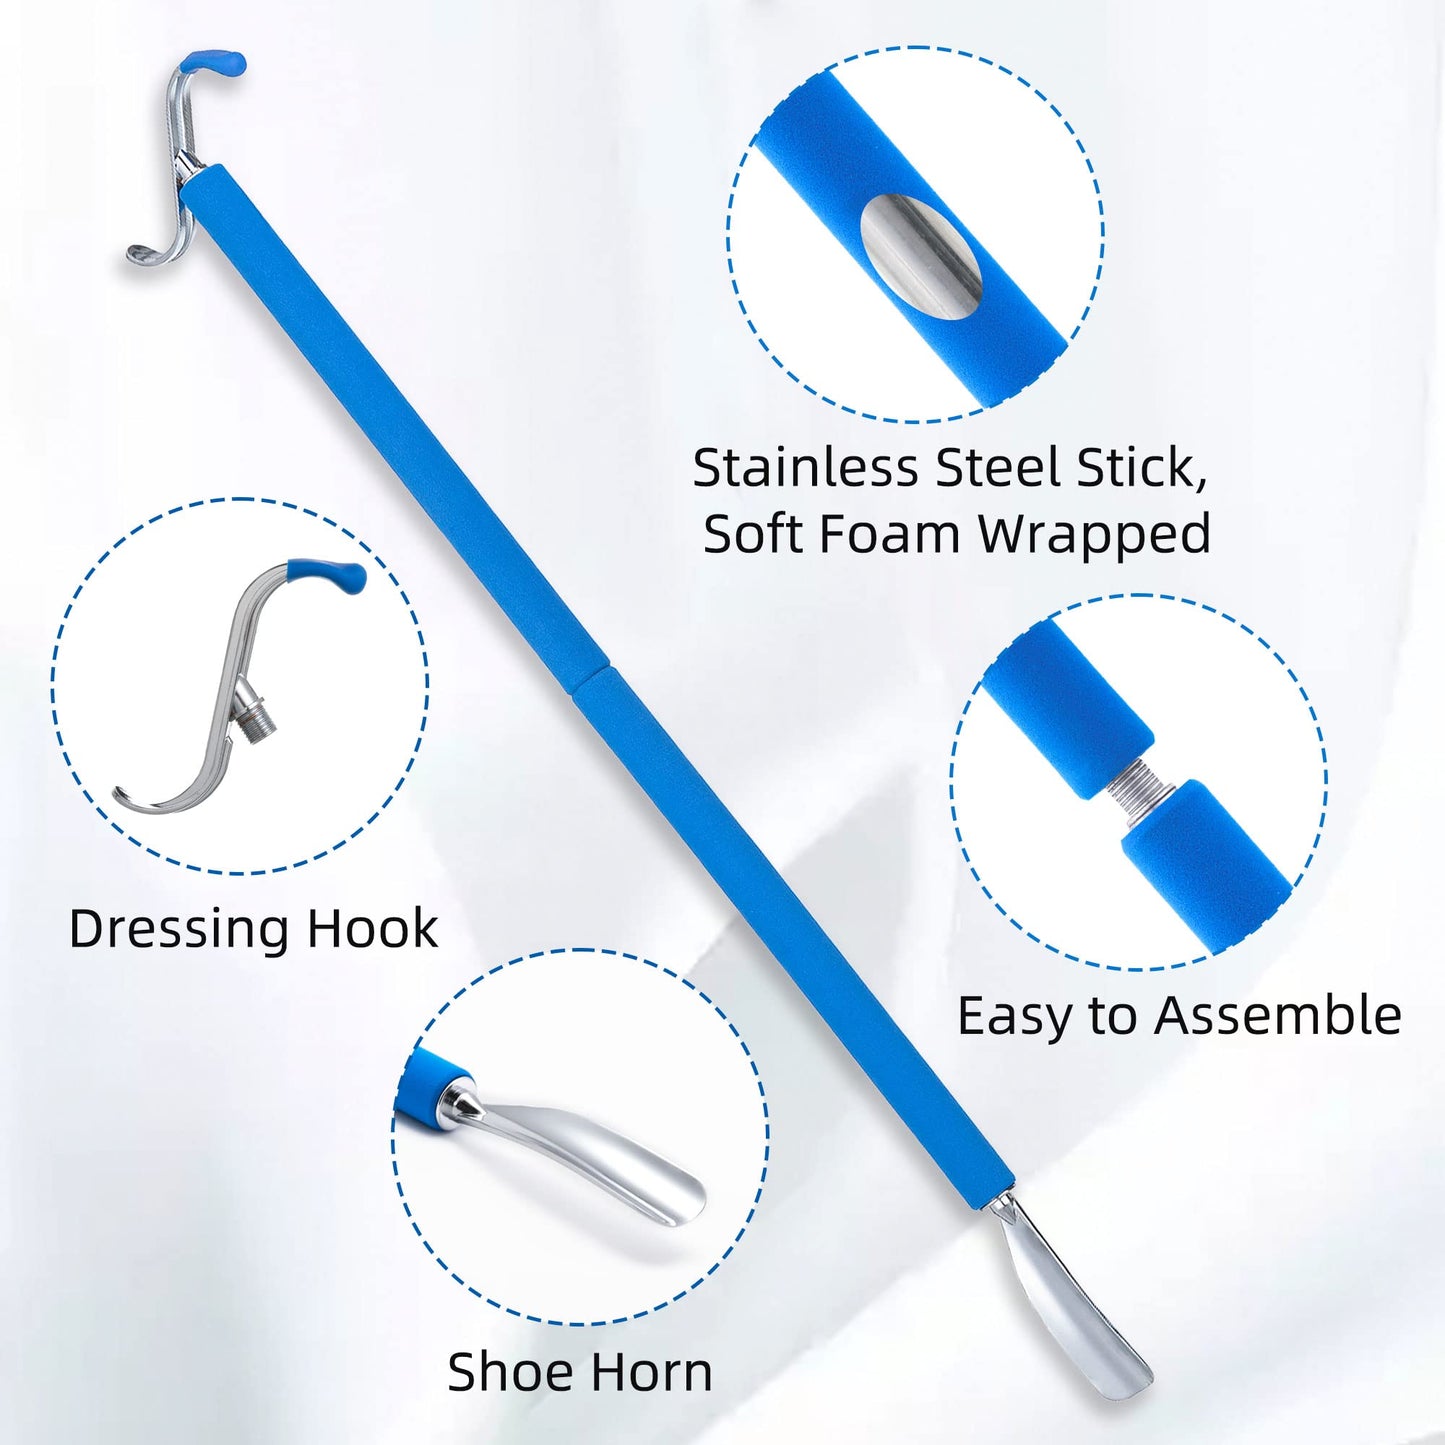 30.3" Metal Shoe Horn Long Handle for Seniors, Long Dressing Stick for Elderly with Sock Removal Tool, Adjustable Extended Dressing Stick Aid Helper for Shoes, Socks, Shirts and Pants